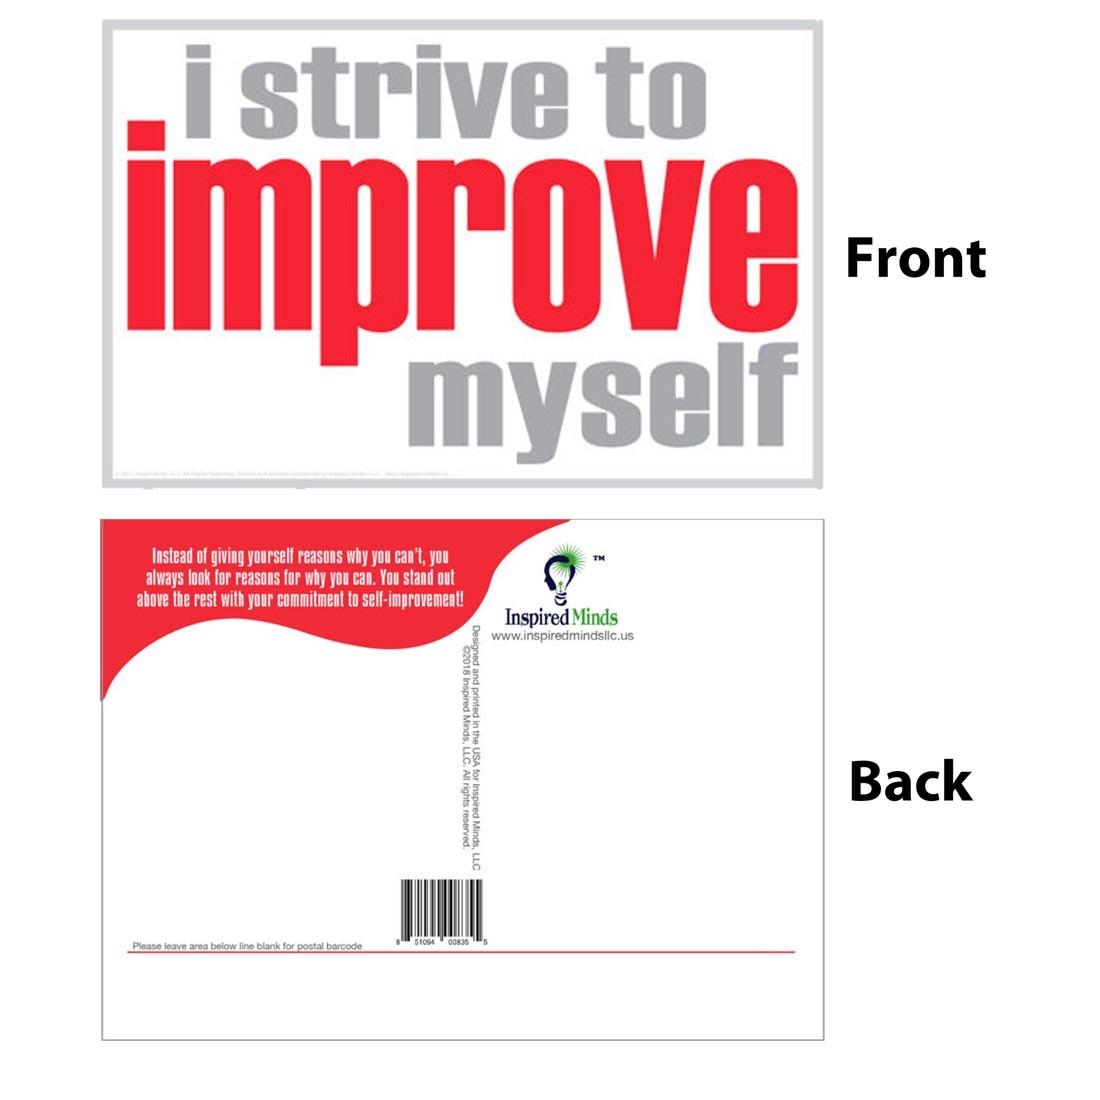 Front and back of the I Strive To Improve Myself Postcard